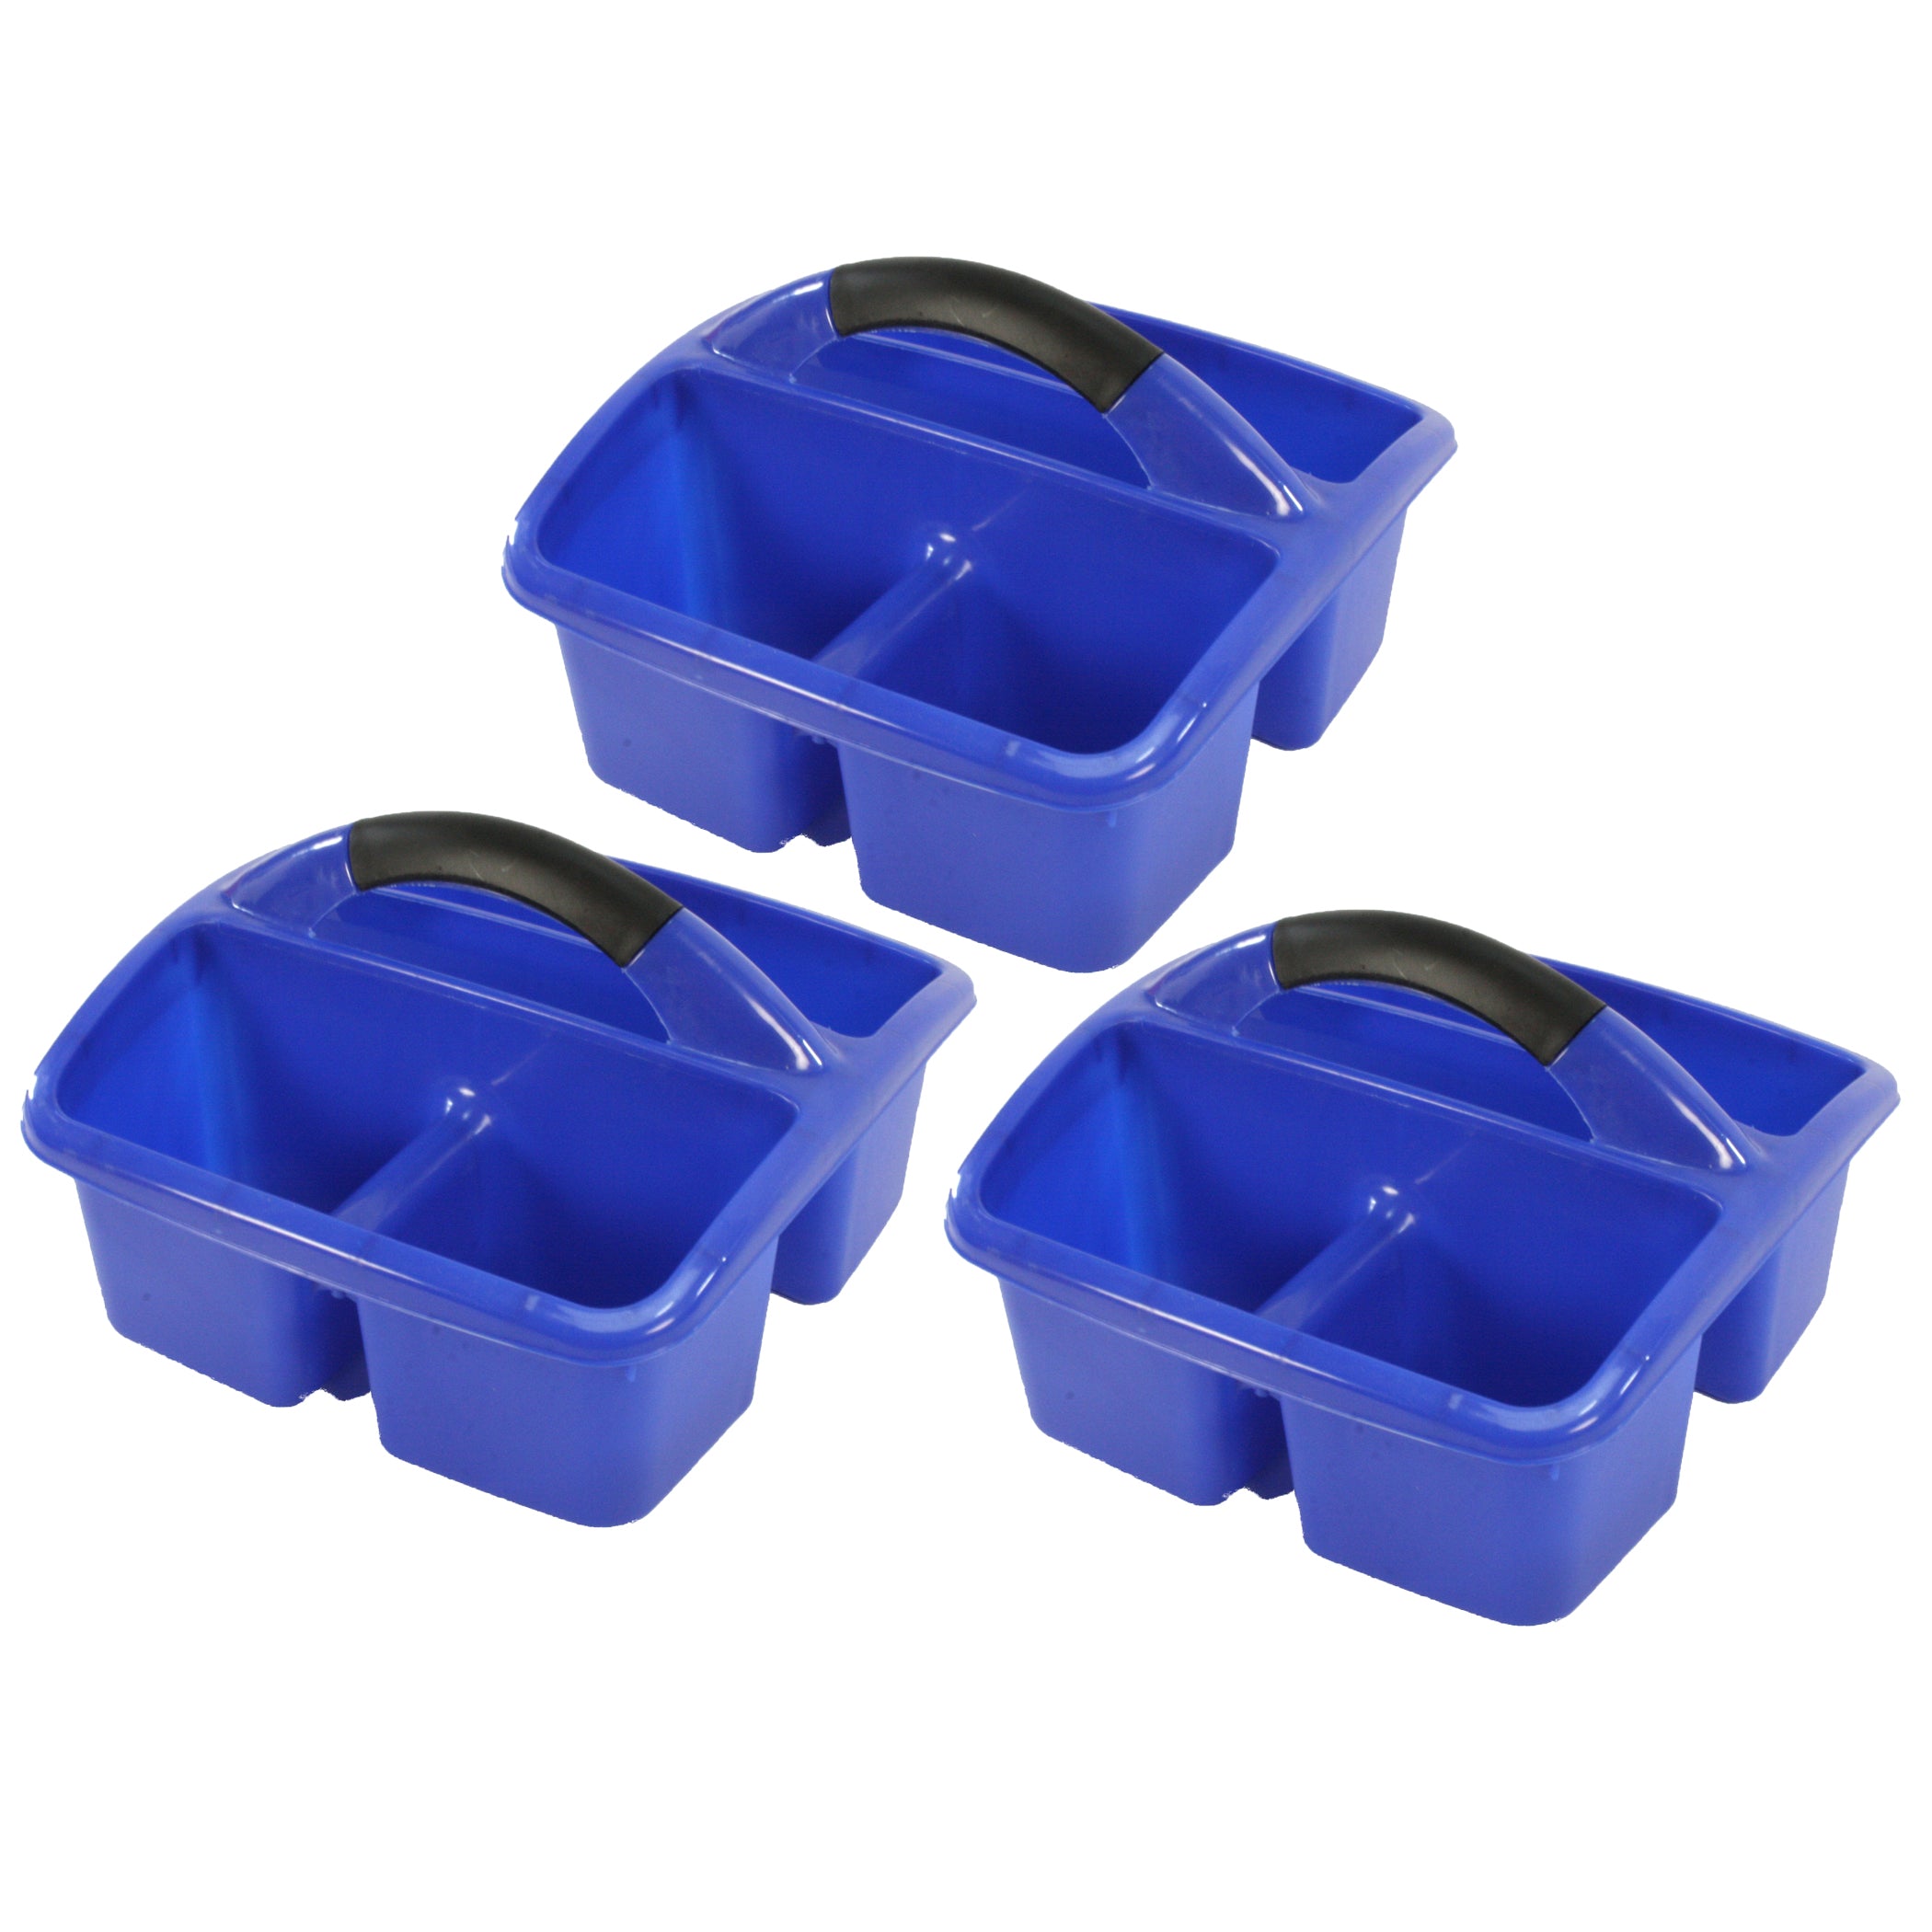 Deluxe Small Utility Caddy, Blue, Pack of 3 - A1 School Supplies